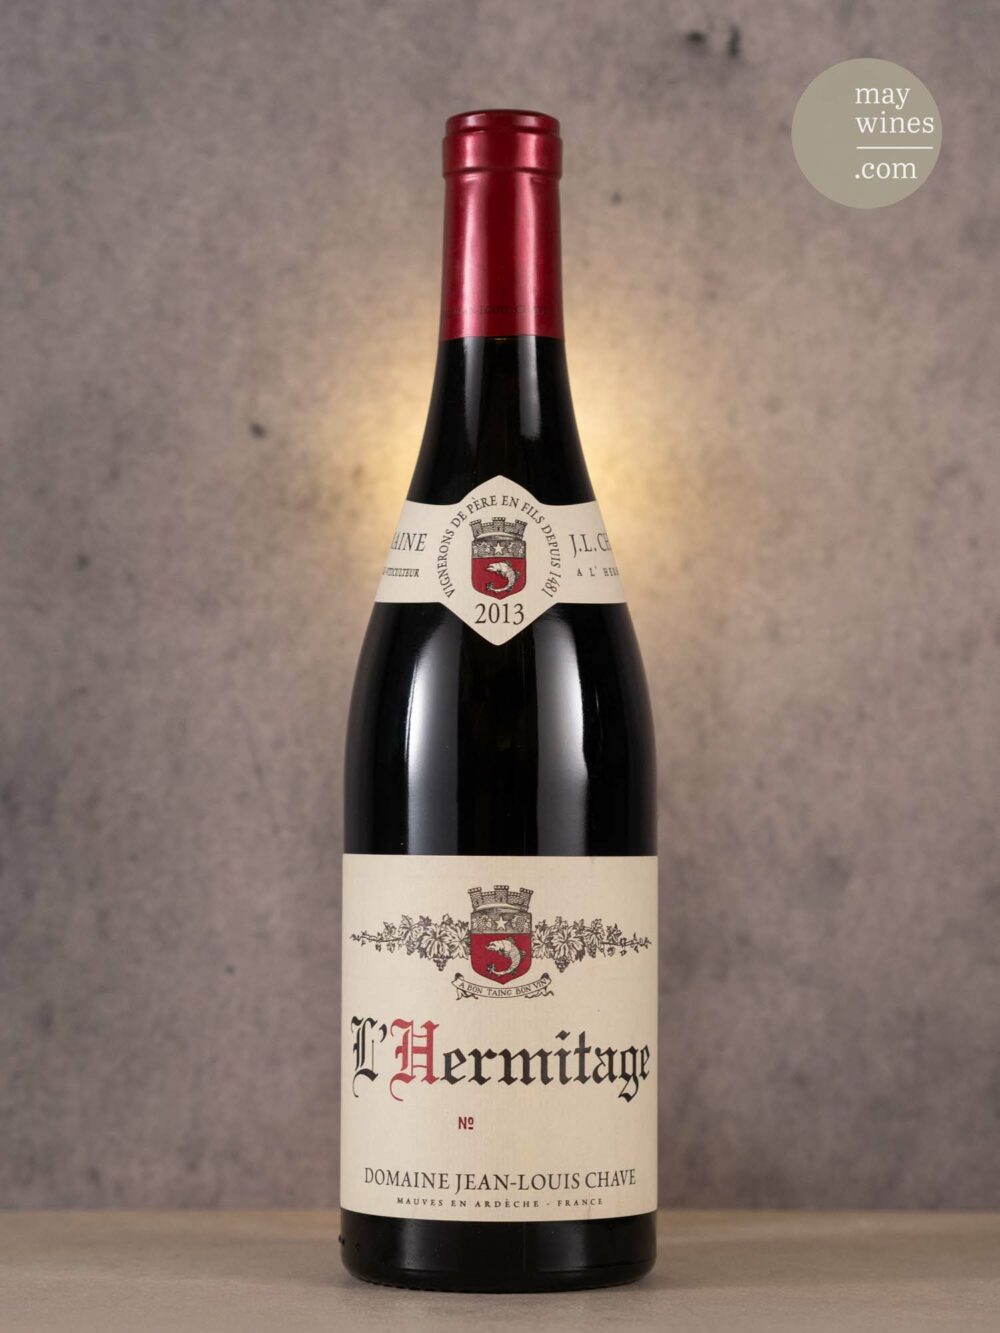 May Wines – Rotwein – 2013 Hermitage Rouge - Domaine Jean-Louis Chave